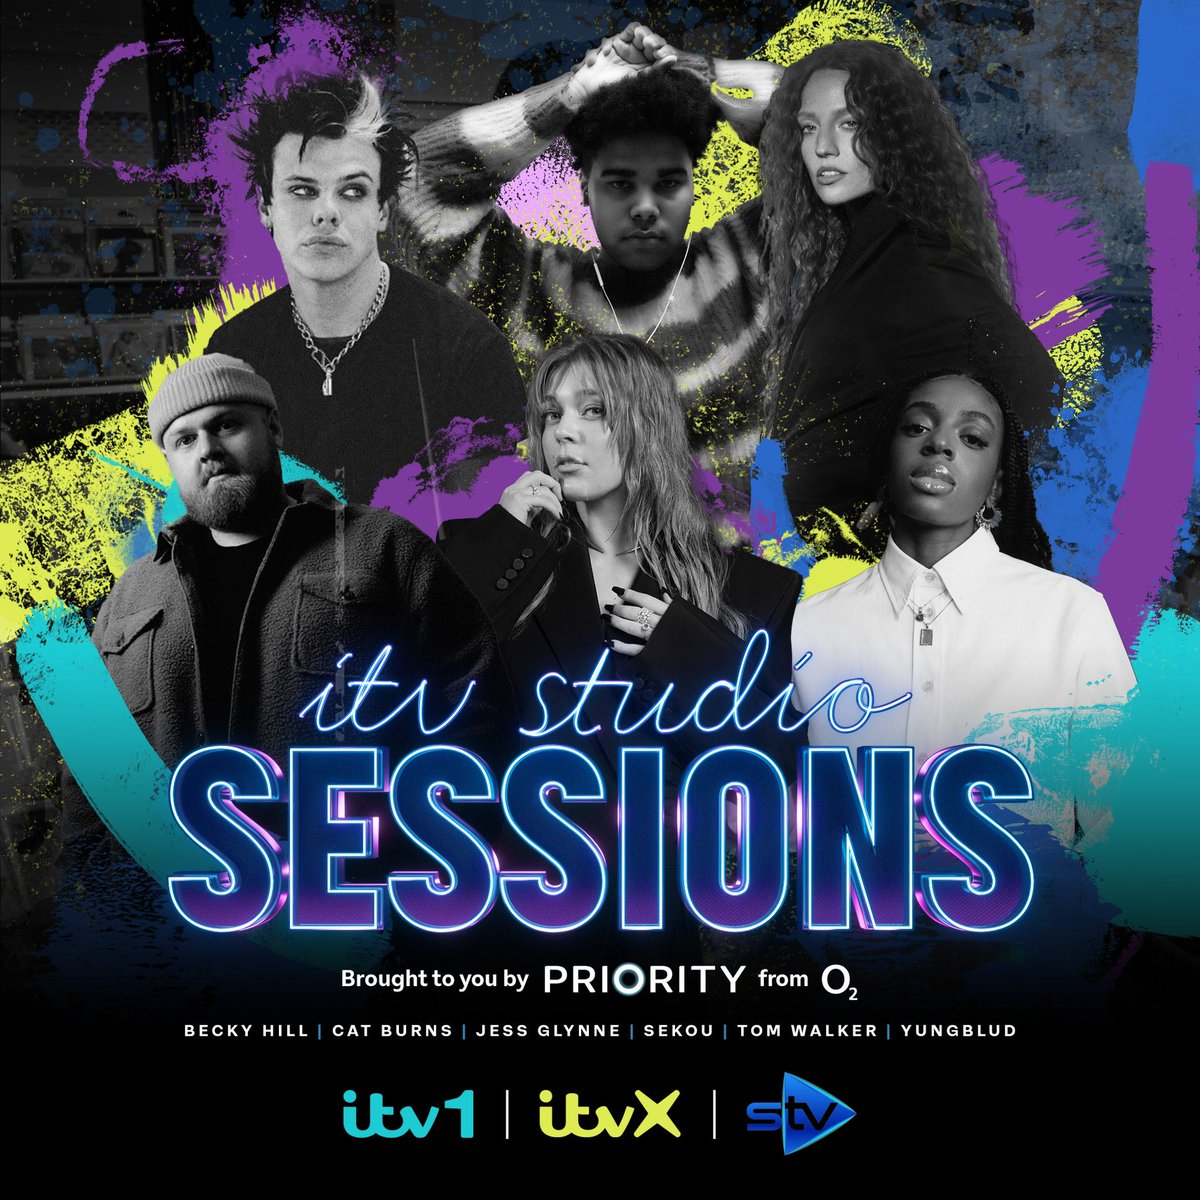 This is not a drill! 🚨 ITV Studio Sessions will be coming this May to ITV1 and ITVX🎙️ Presented to you by Clara Amfo and featuring some of the most talented UK artists! Including Becky Hill, Cat Burns, Jess Glynne, Tom Walker, Sekou and YUNGBLUD  🎶 #ITVStudioSessions